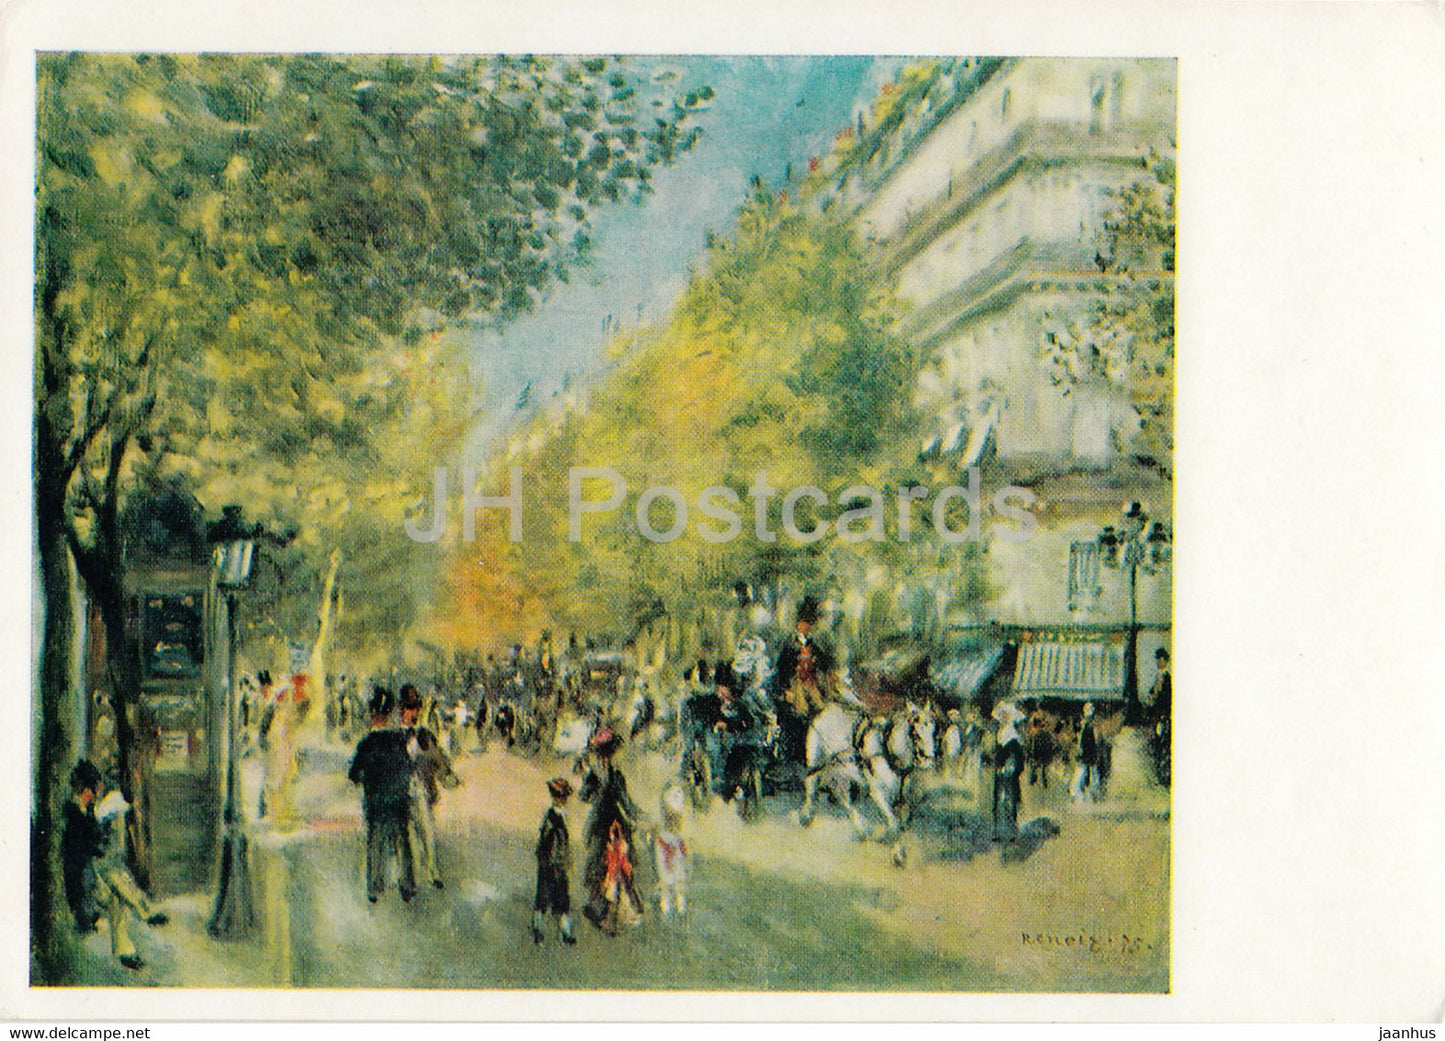 painting by Auguste Renoir - Auf den grossen Boulevards - The great boulevards - French art - Germany DDR - unused - JH Postcards